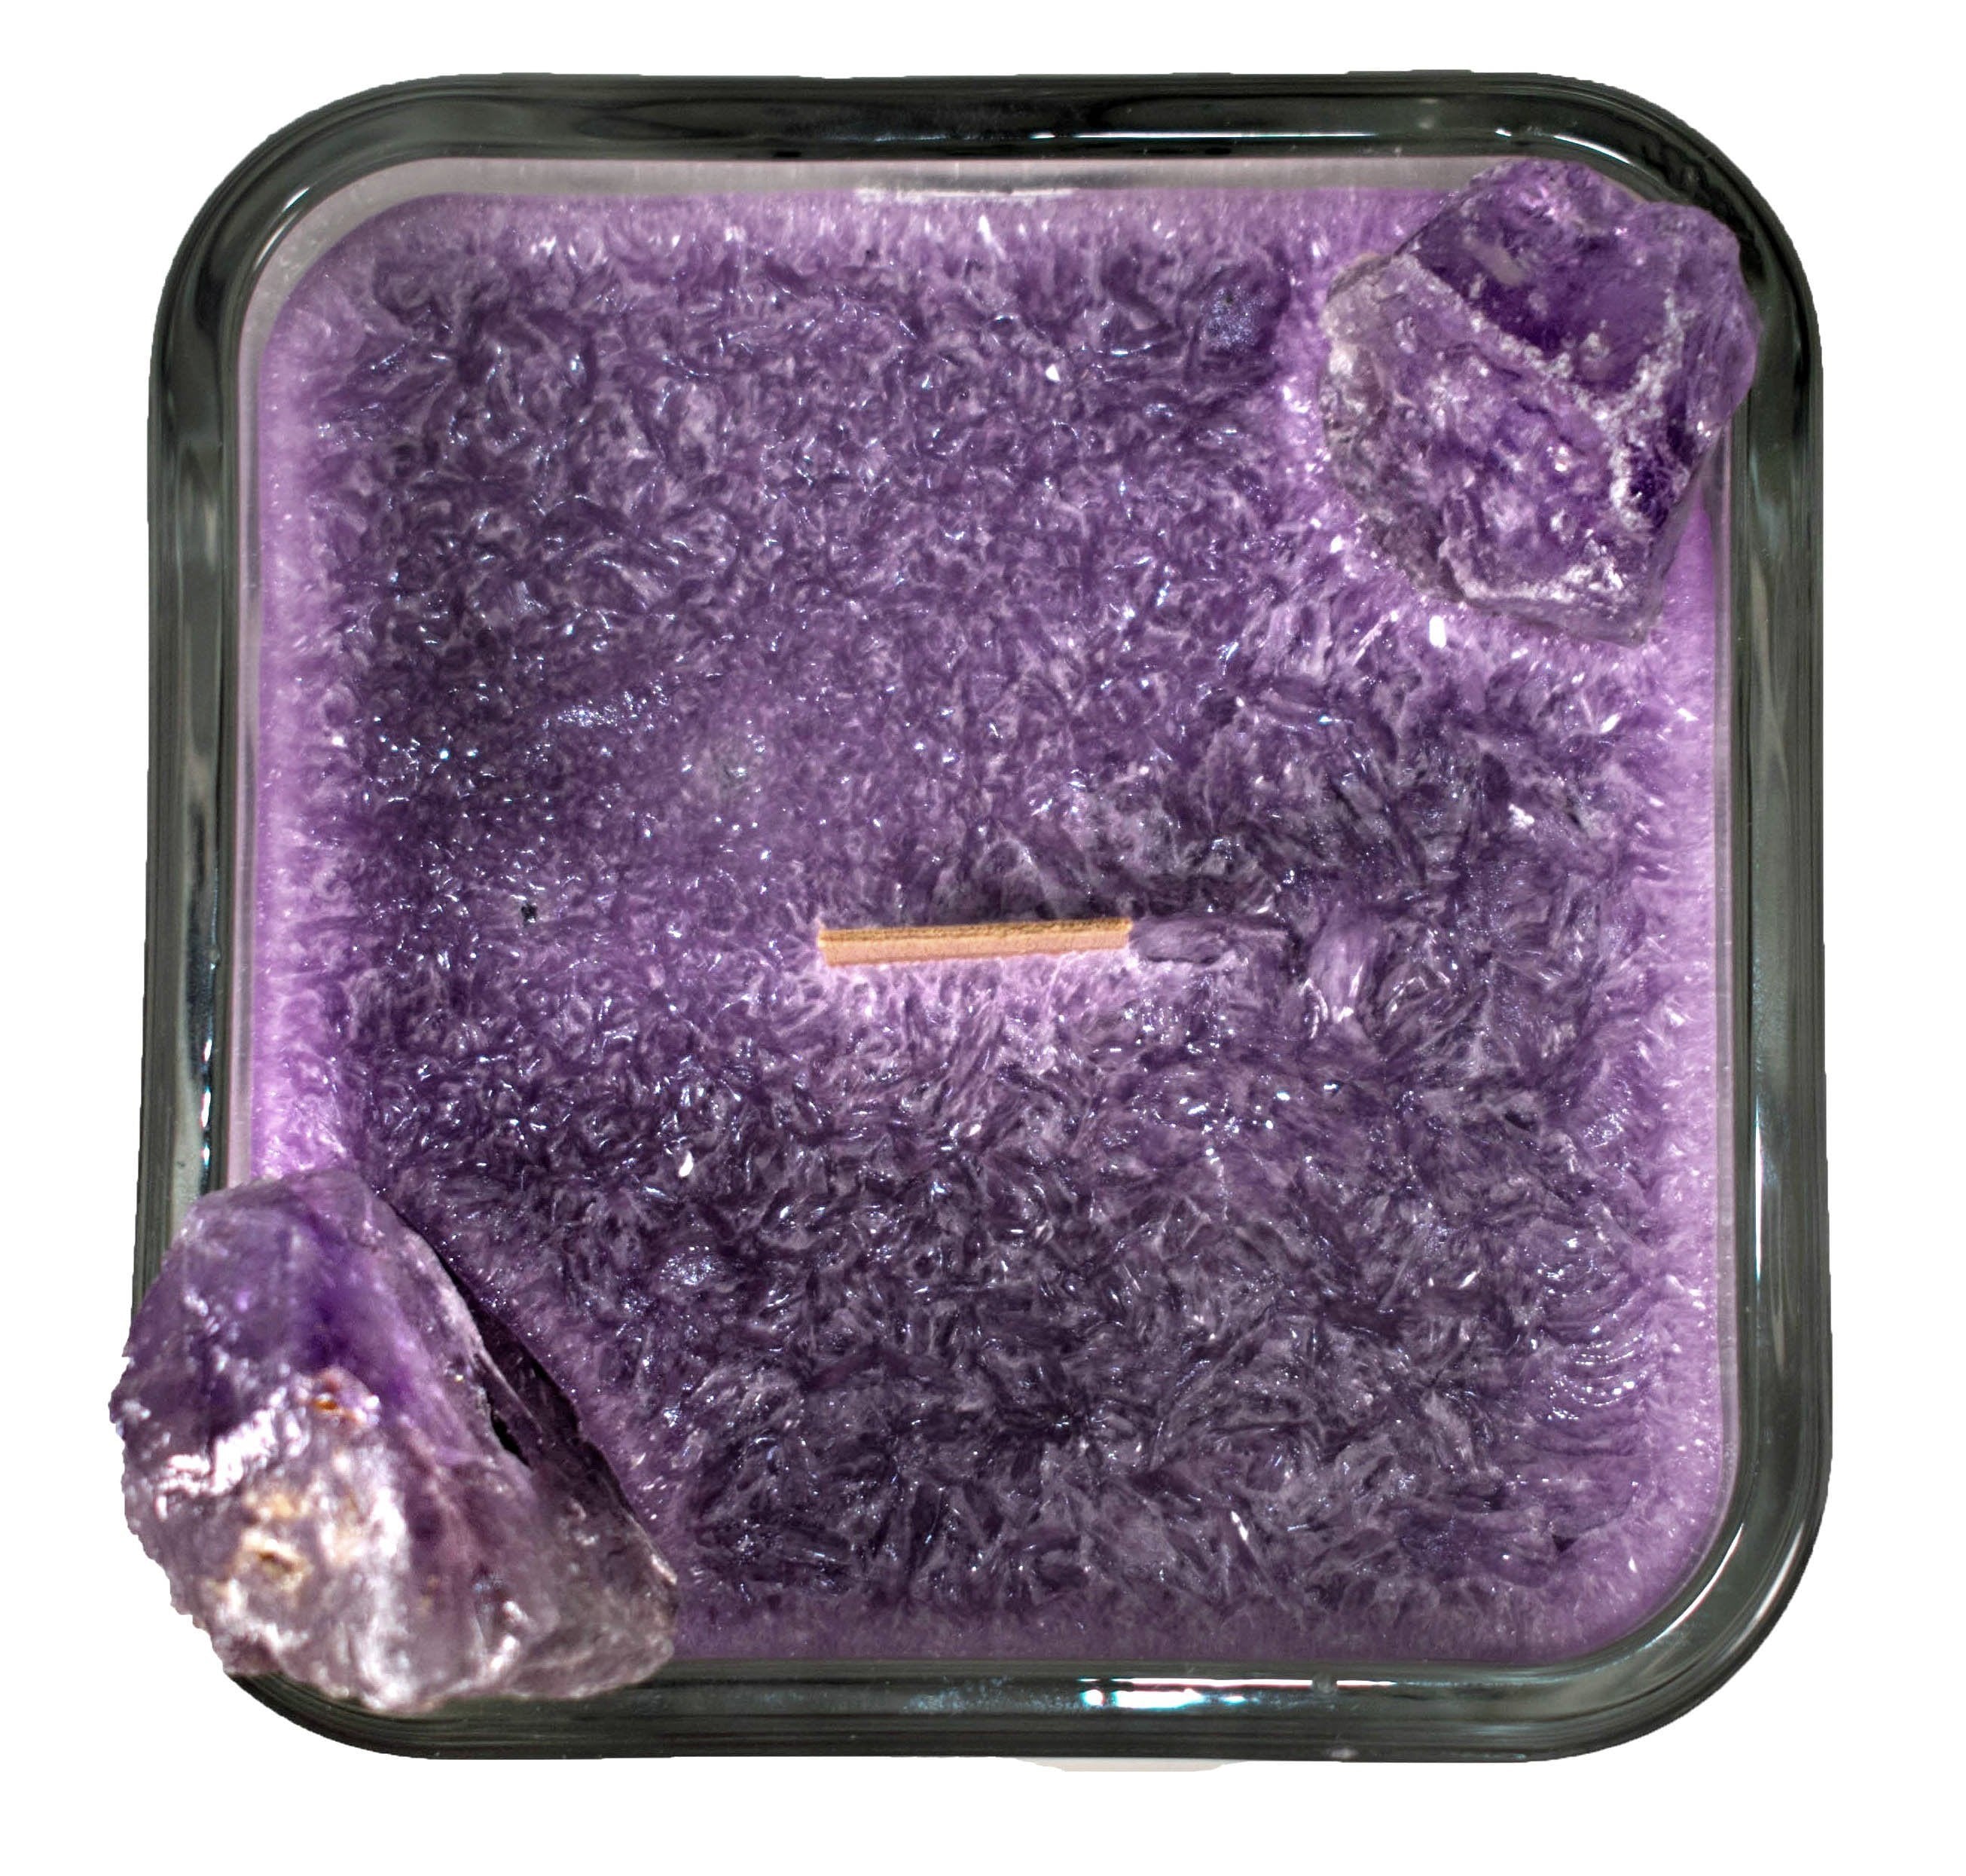 Luxury Scented Aromatherapy Candle fragranced with pure essential oils, natural palm wax with Amethyst Healing crystals. Ideal for Chakra healing, mindfulness, spirituality, positive energy, for a balanced grounded life. Hand poured in small batches in Winnipeg Canada